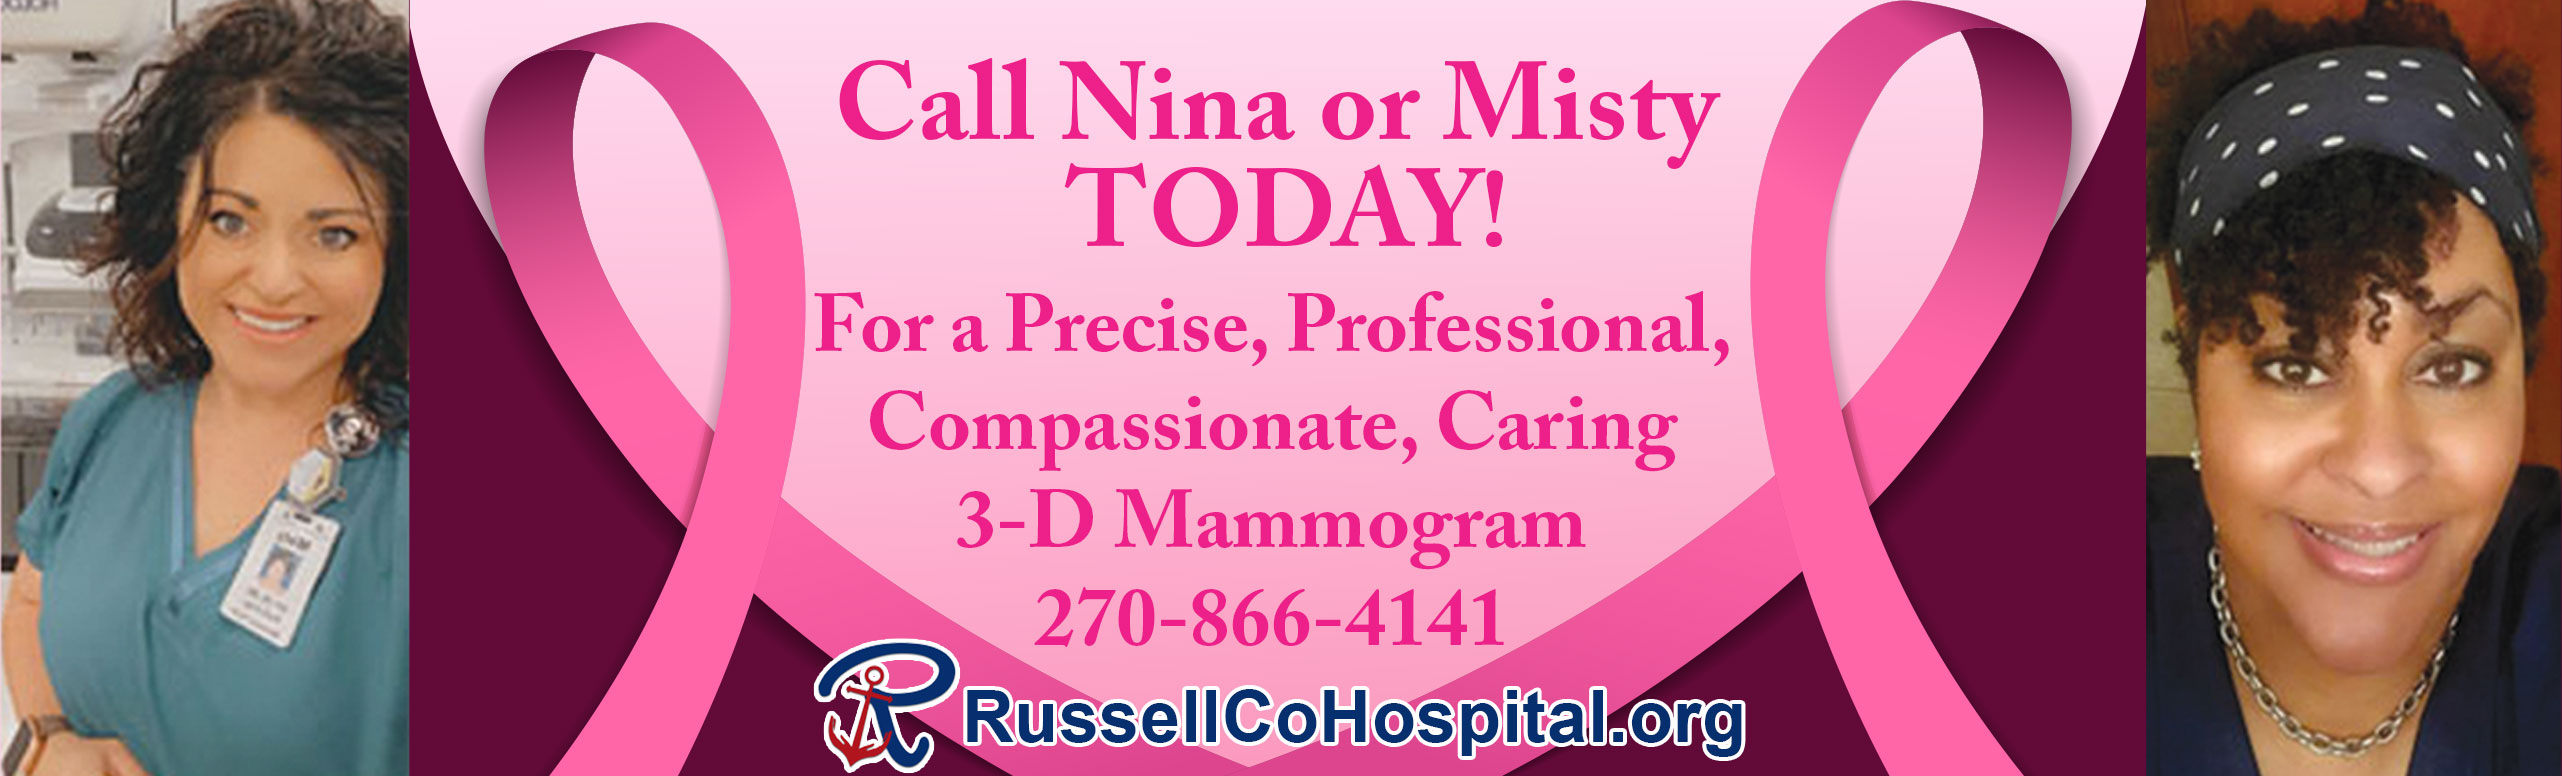 Banner Picture of two female Nurses, Nina and Misty.. Banner says:
Call Nina or Misty TODAY!
For a Precise, Professional, Compassionate, Caring 3-D Mammogram
270-866-4141
RussellCOHospital.org